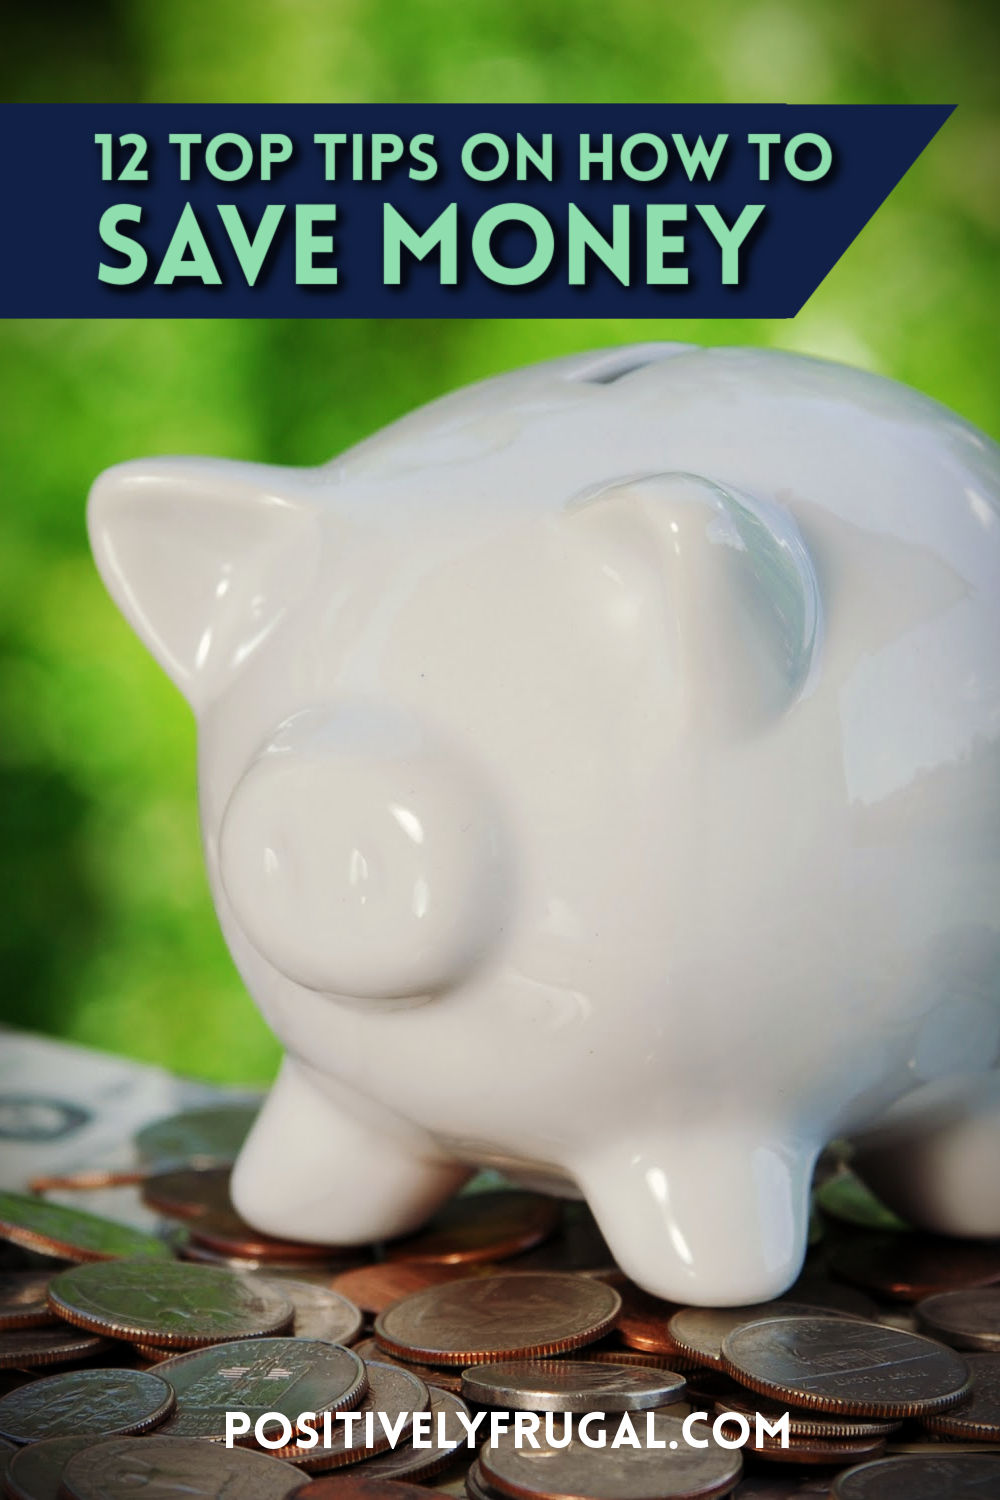 Tips on How To Save Money by PositivelyFrugal.com